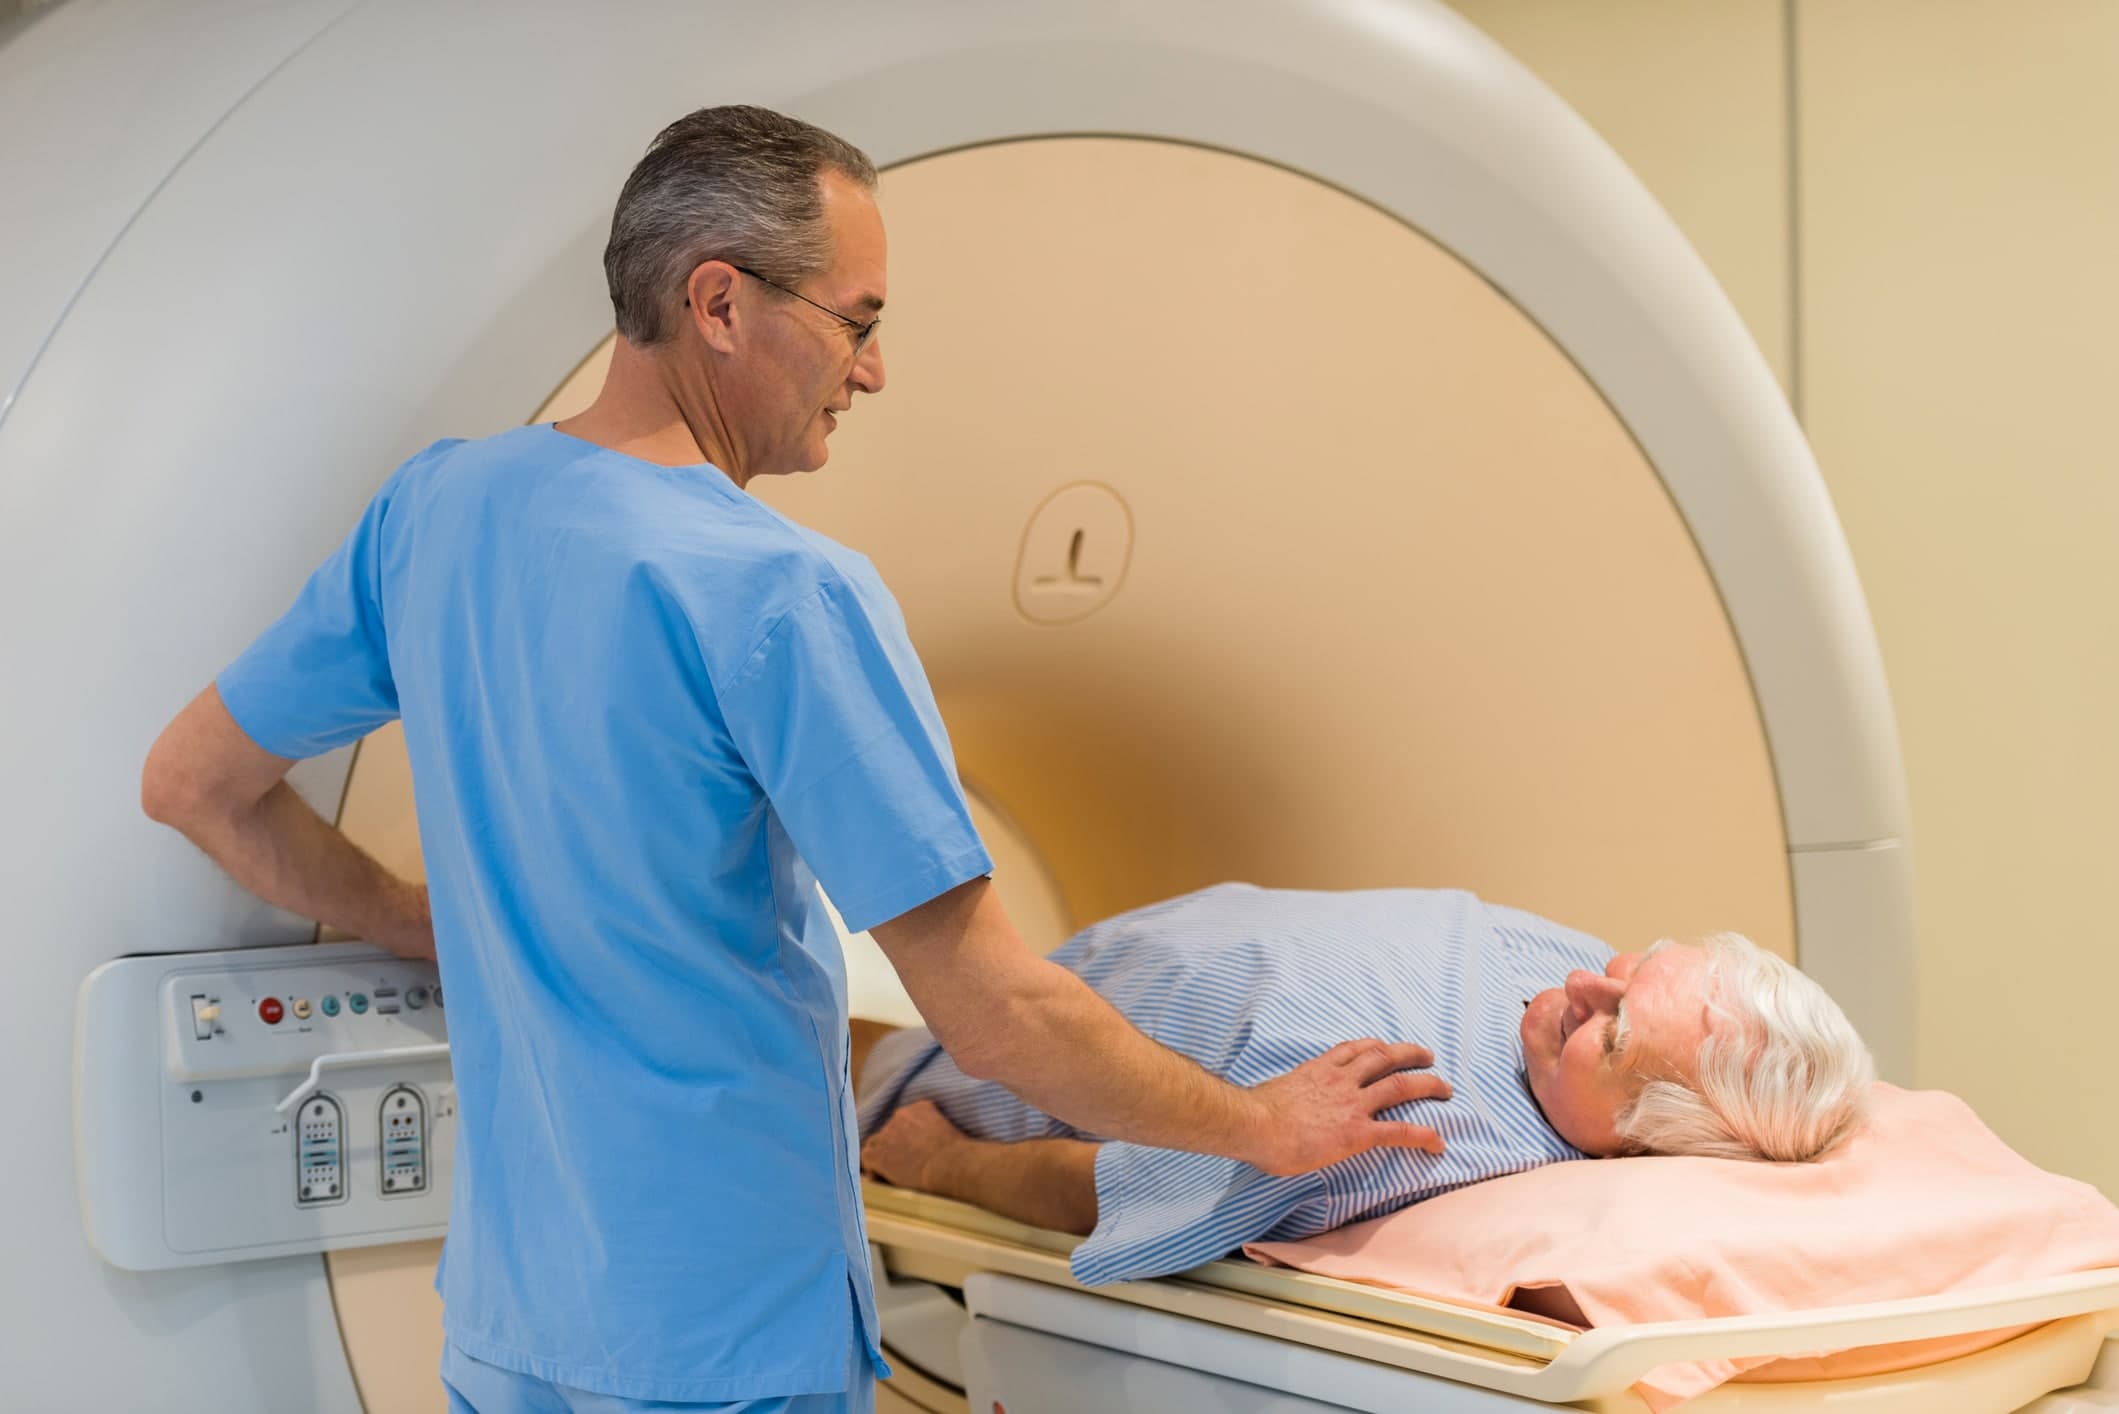 Radiologist consoling a senior patient at MRI scan.